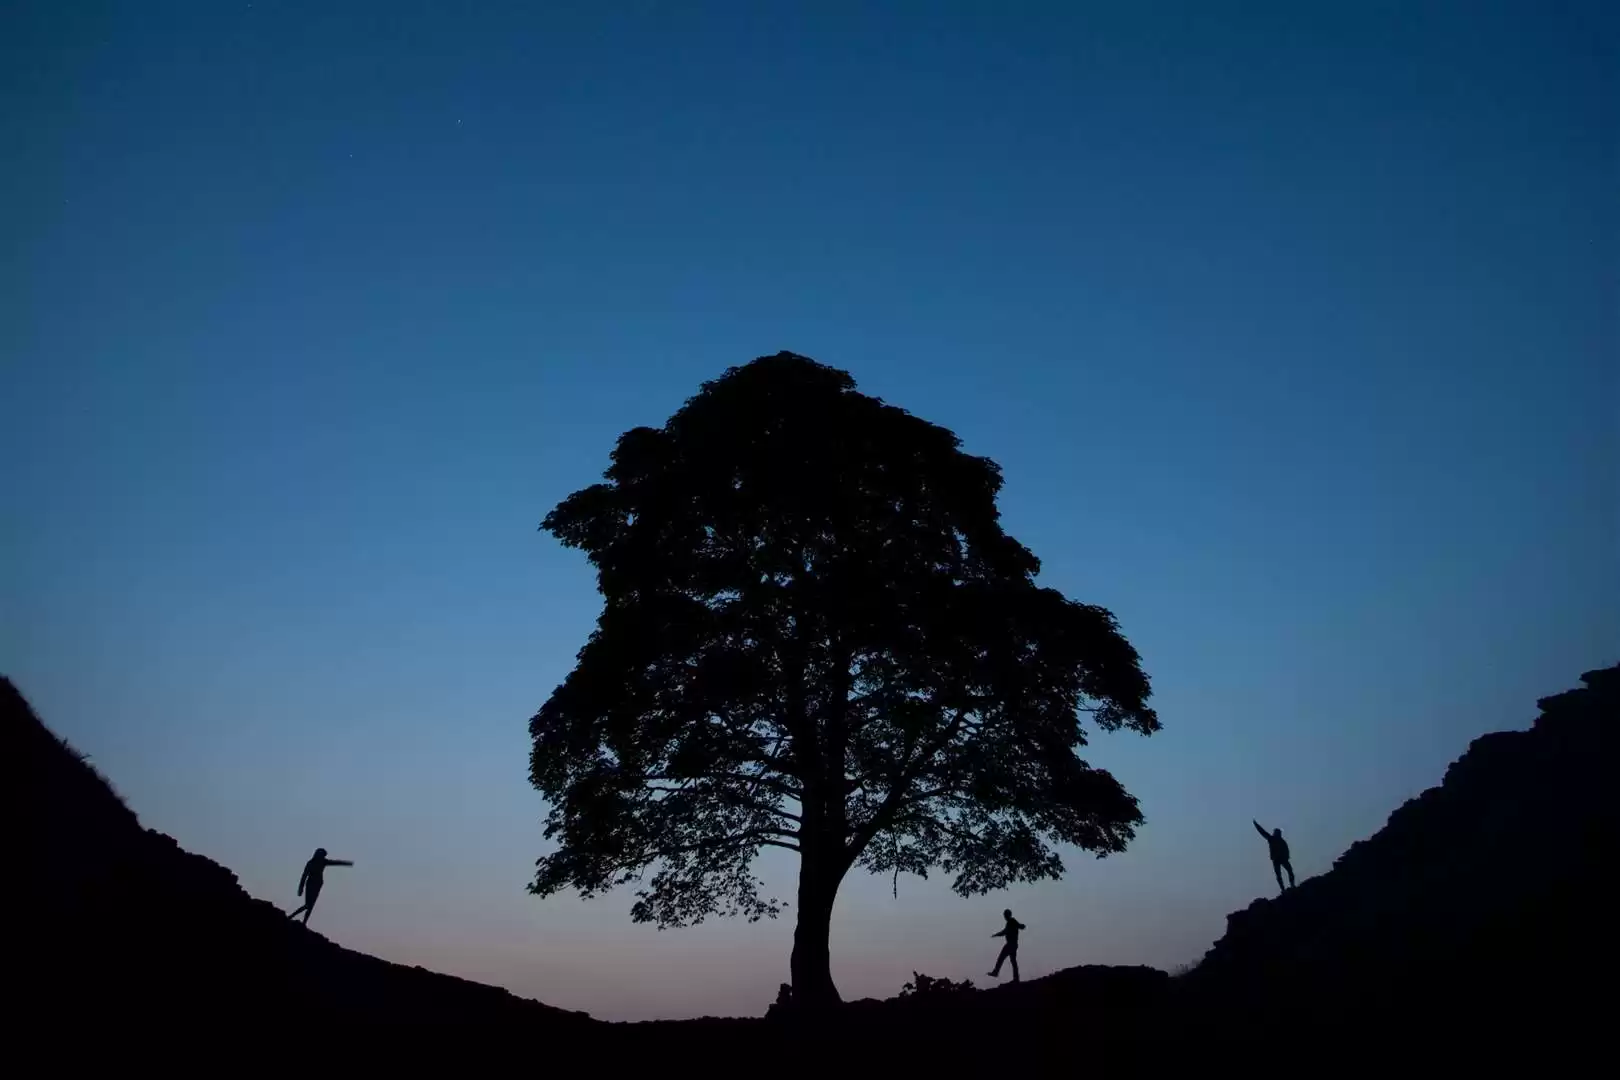 Teenage Boy Arrested for Felling Sycamore Gap Tree Released on Bail